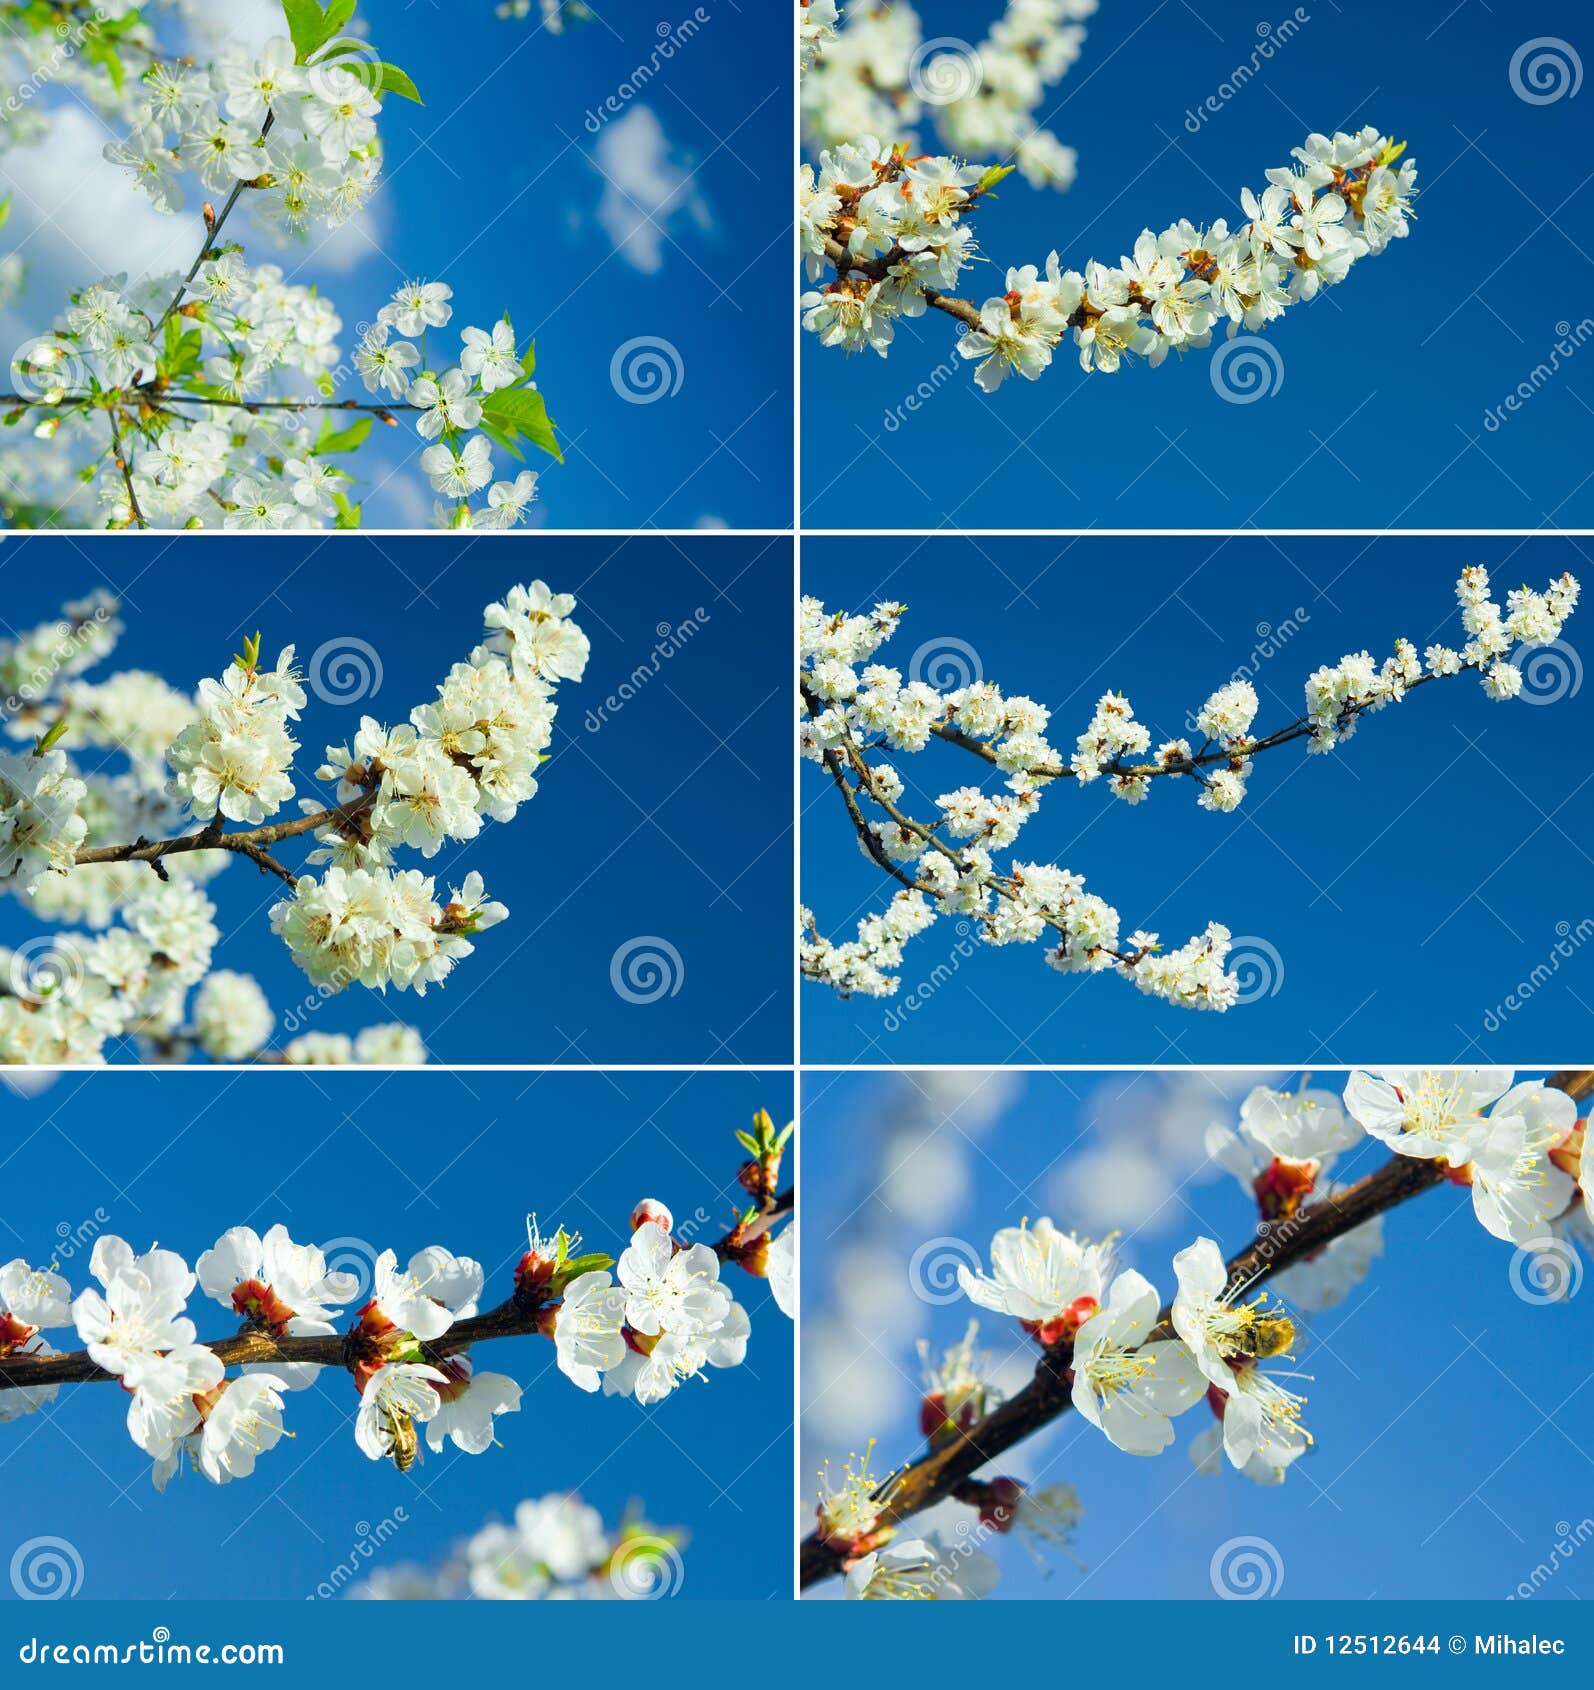 Branches blossoming stock photo. Image of plant, organic - 12512644